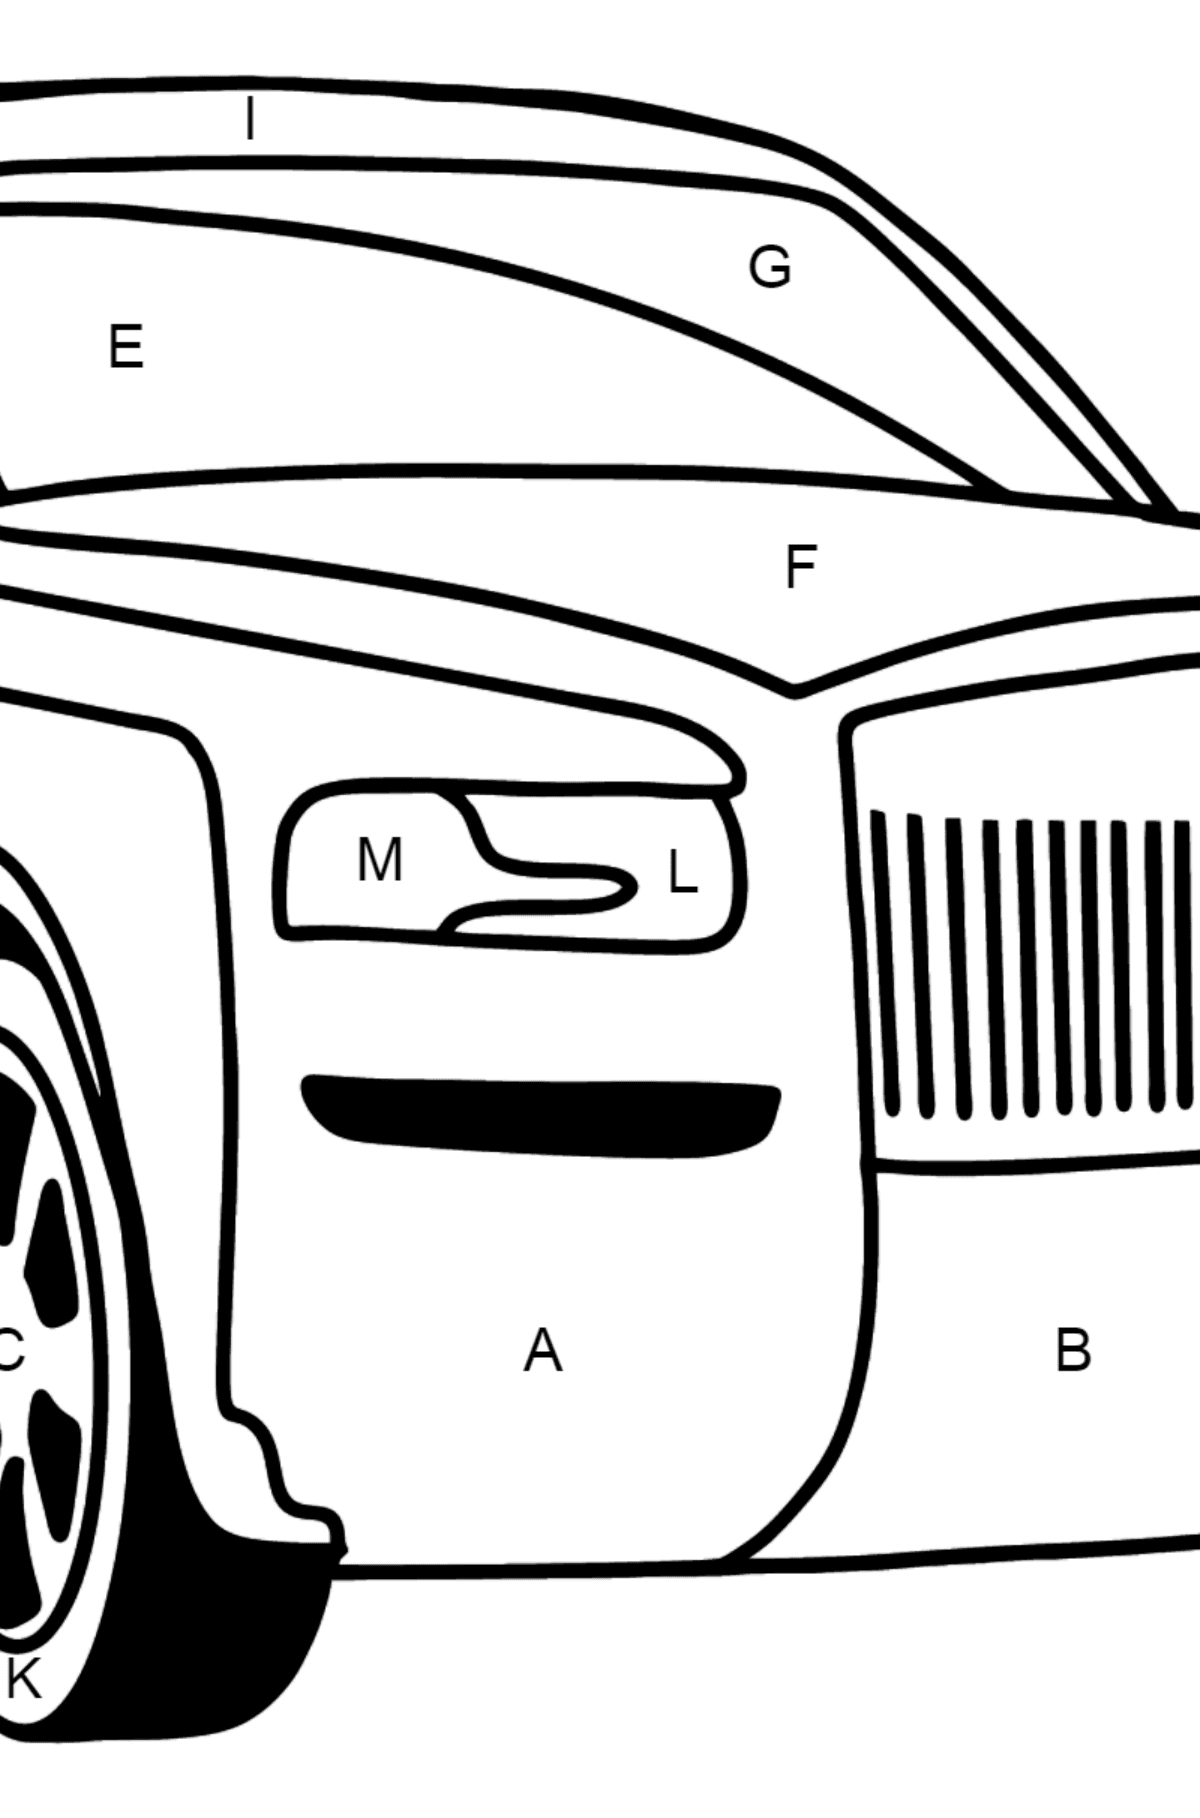 Rolls Royce Cullinan Car coloring page - Coloring by Letters for Kids